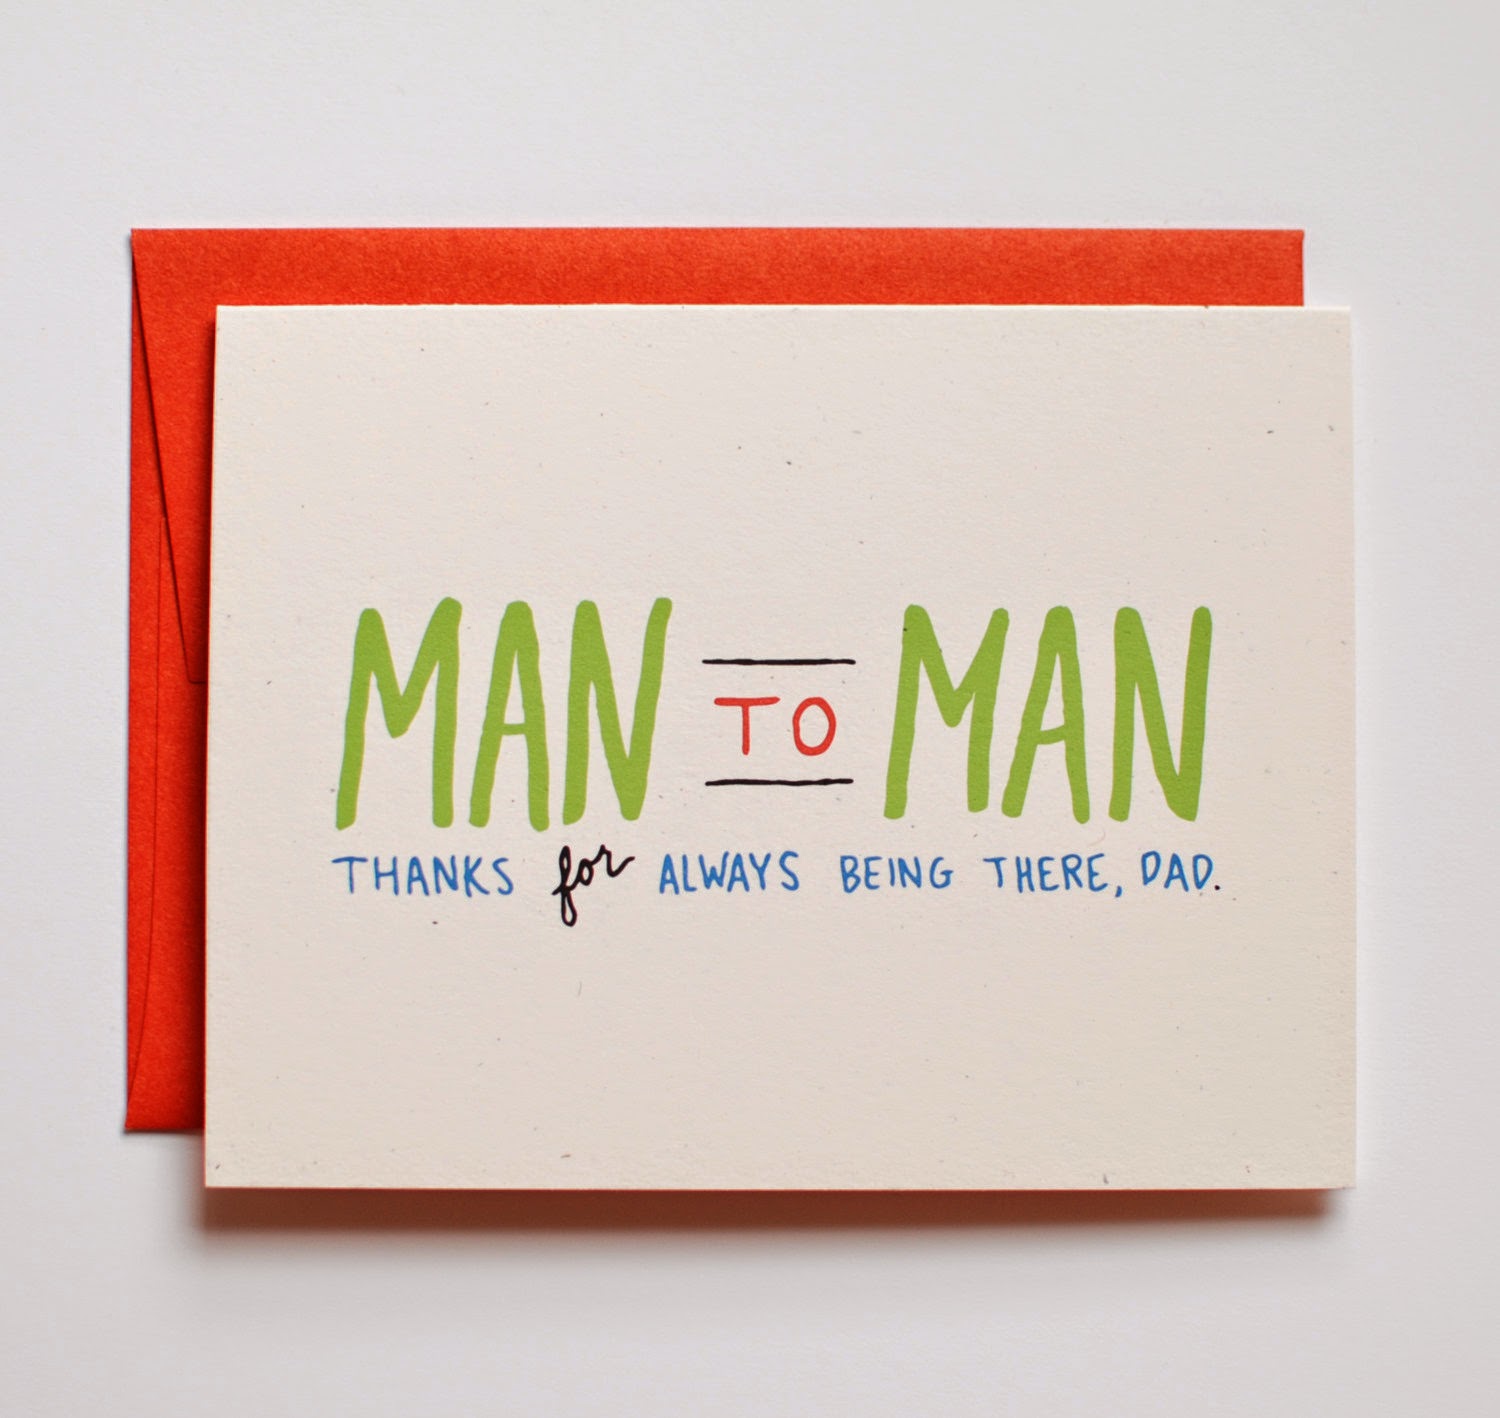 https://www.etsy.com/listing/188749099/fathers-day-card-fathers-day-card-card?ref=related-5